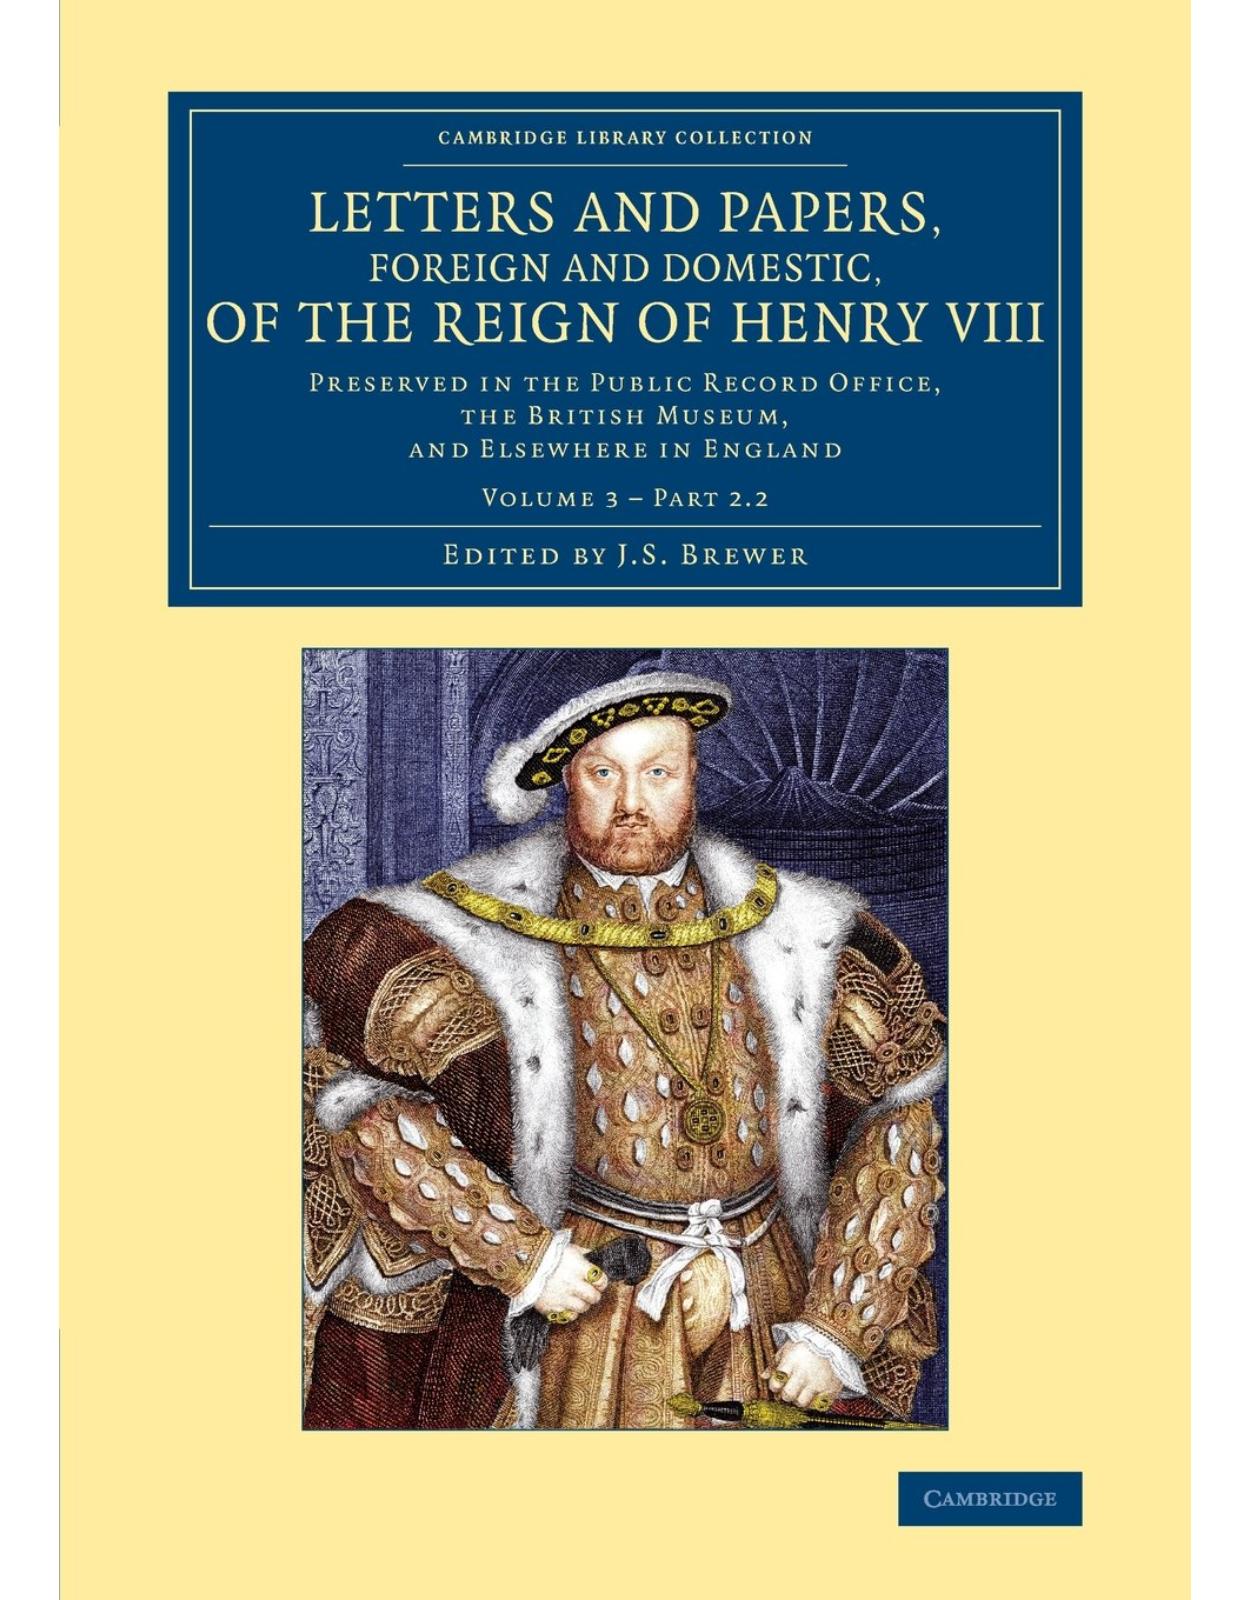 Letters and Papers, Foreign and Domestic, of the Reign of Henry VIII: Volume 3, Part 2.2: Preserved in the Public Record Office, the British Museum, ... and Irish History, 15th & 16th Centuries)